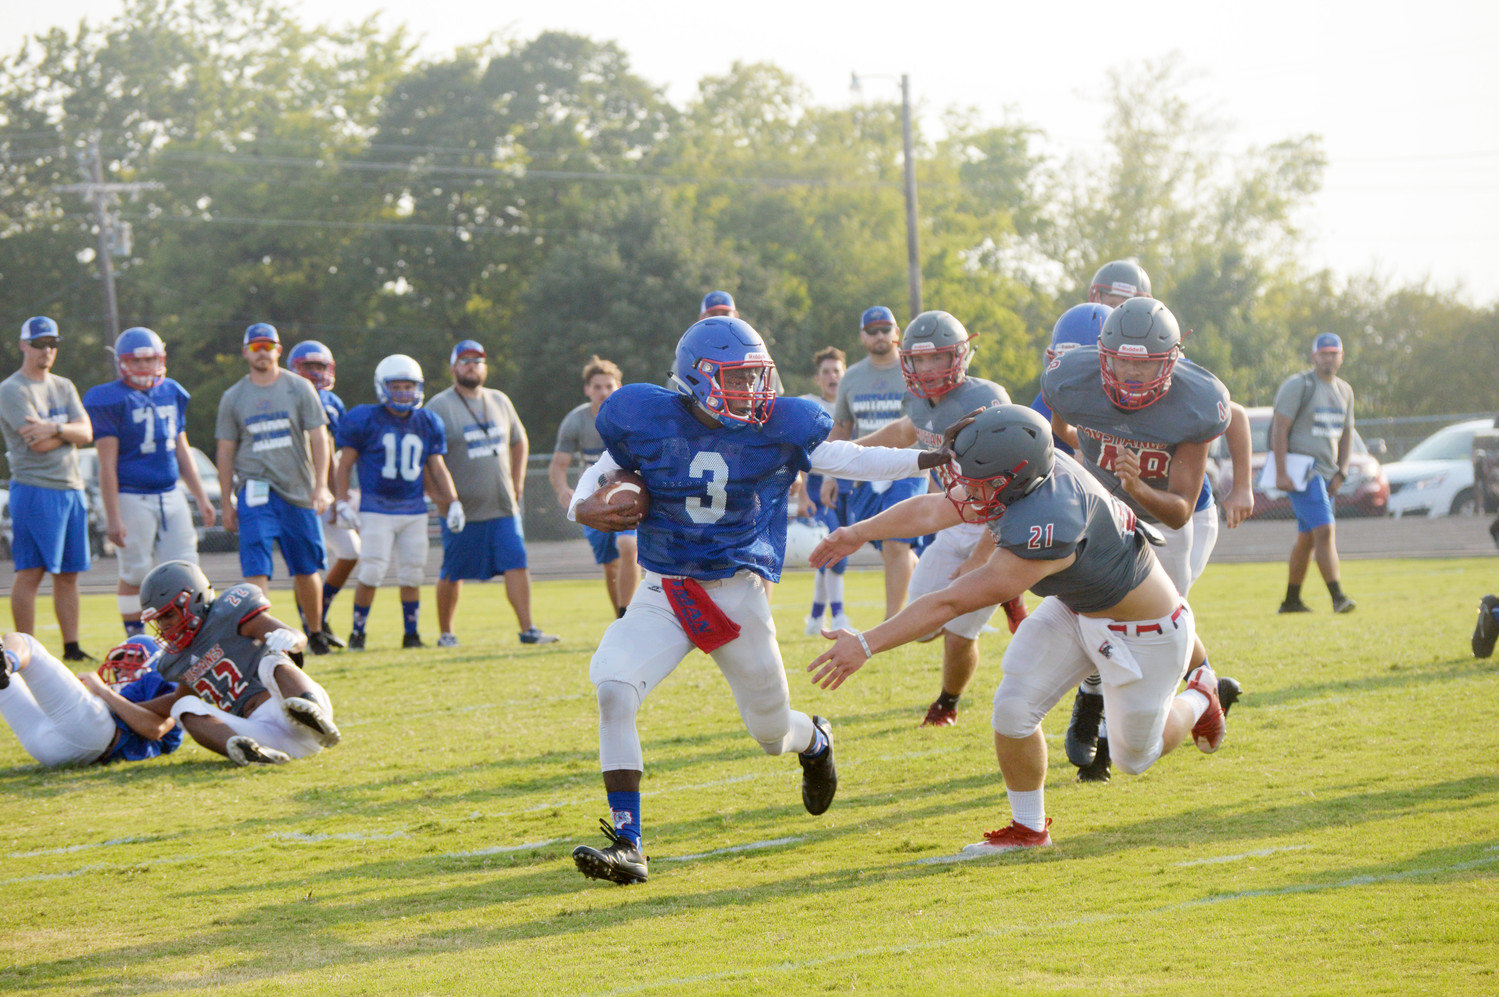 Quitman’s Trey Berry (3) stiff arms a Paris Chisum defender on the way to a 65-yard scoring touchdown in the Bulldogs scrimmage last Thursday.